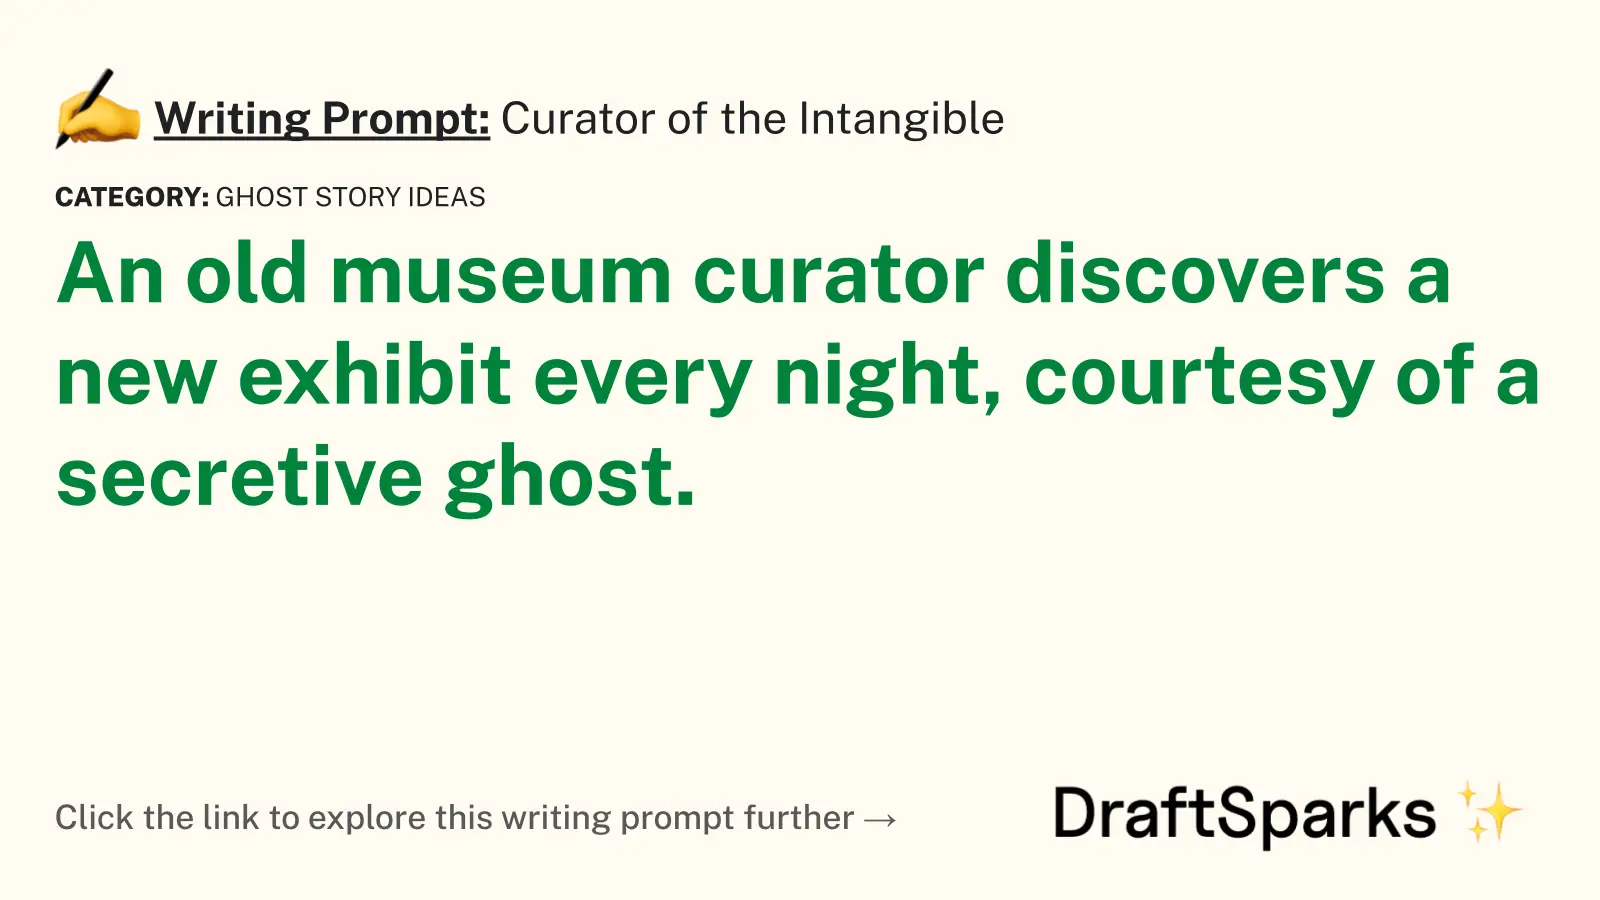 Curator of the Intangible